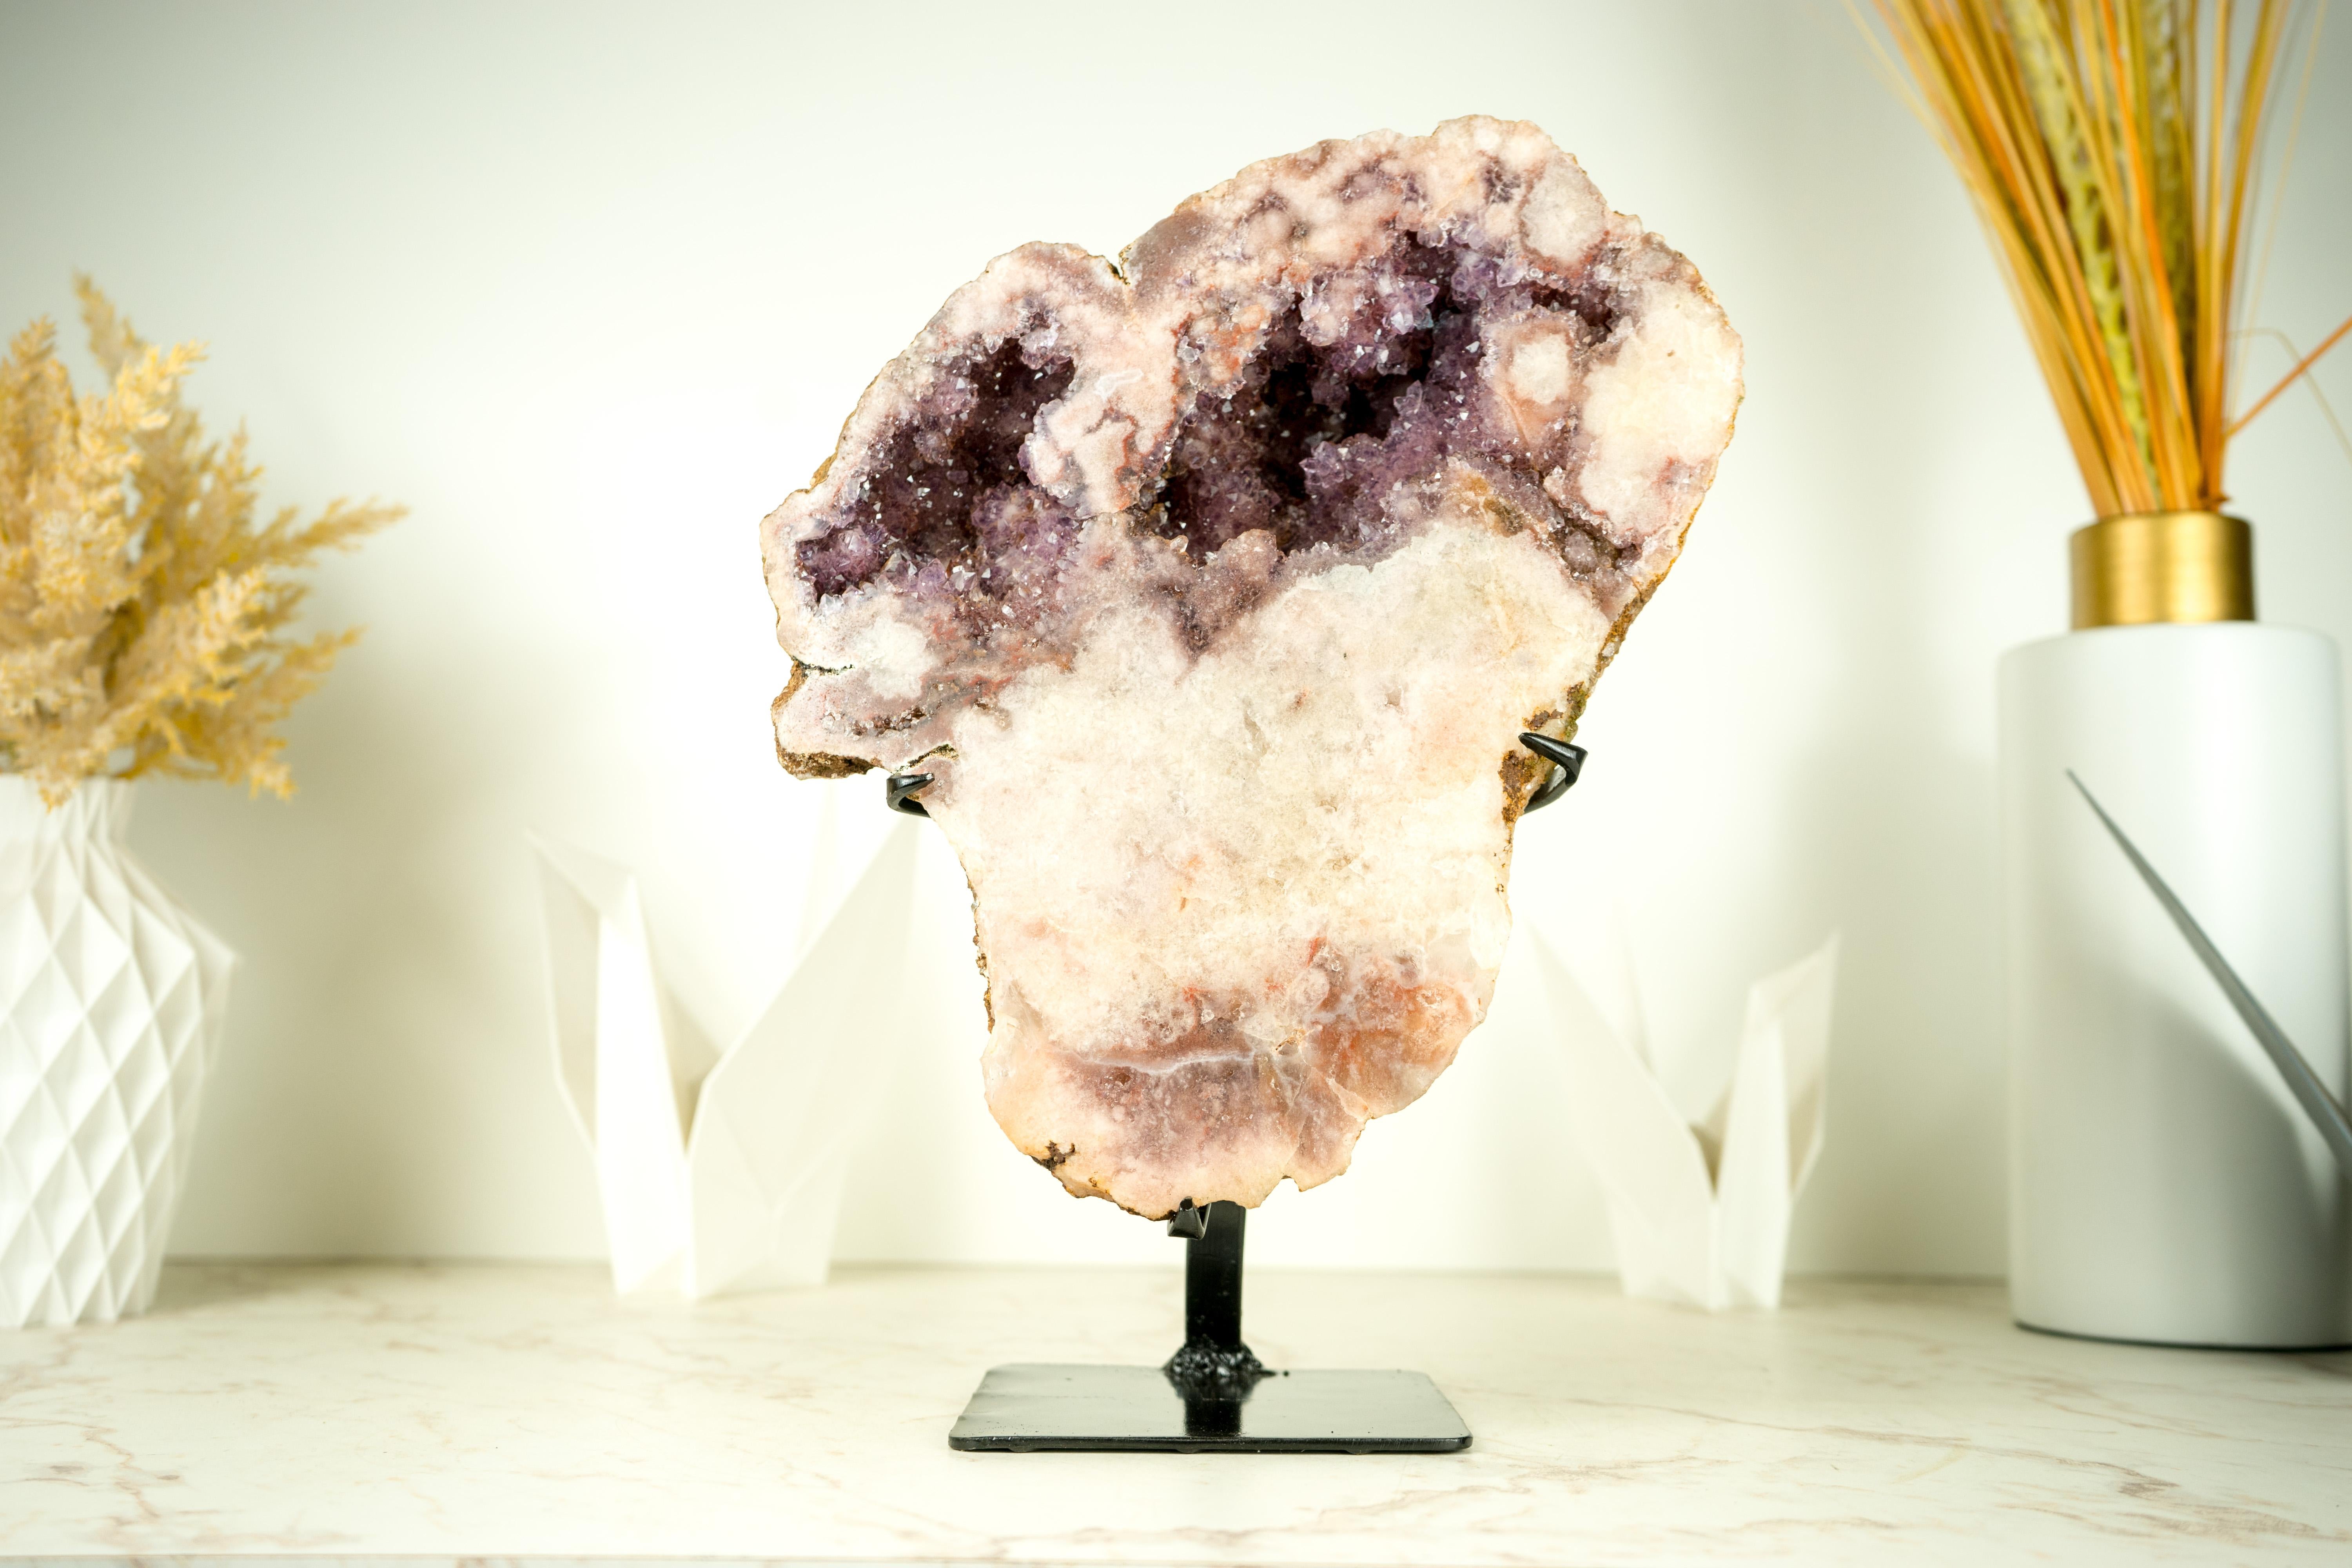 High-Grade Pink Amethyst Geode on Stand with Lavender Pink Amethyst Druzy

▫️ Description

Naturally beautiful, this Pink Amethyst geode exhibits a rare balance of colors, as if it were a painting. The lavender rose druzy contrasts with the pastel